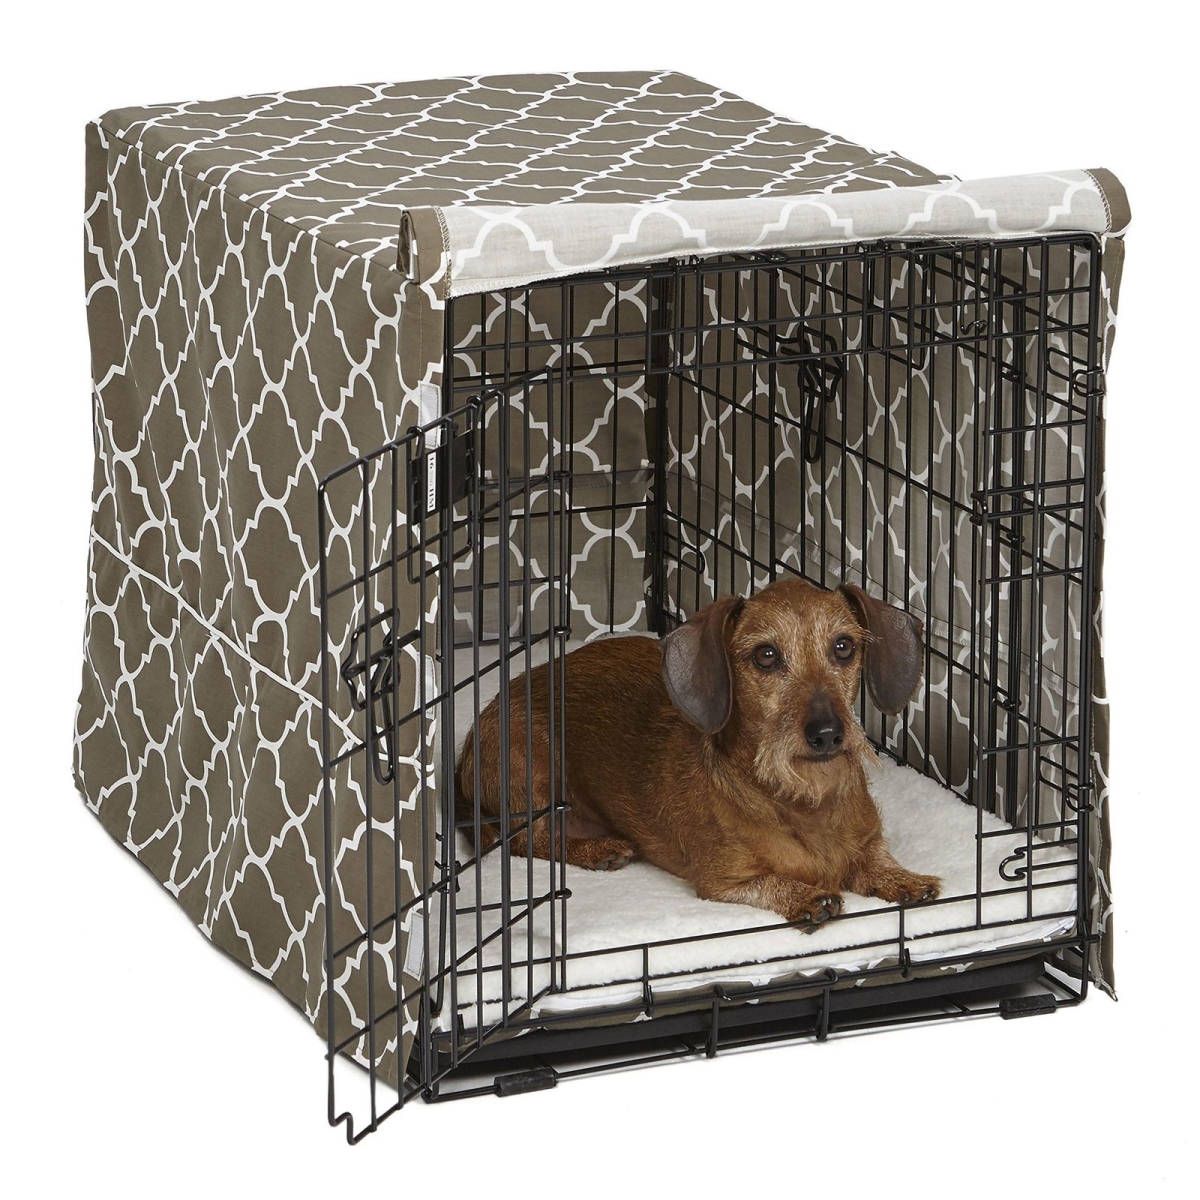 249518 30 In. Brn Pets Dog Crate Cover